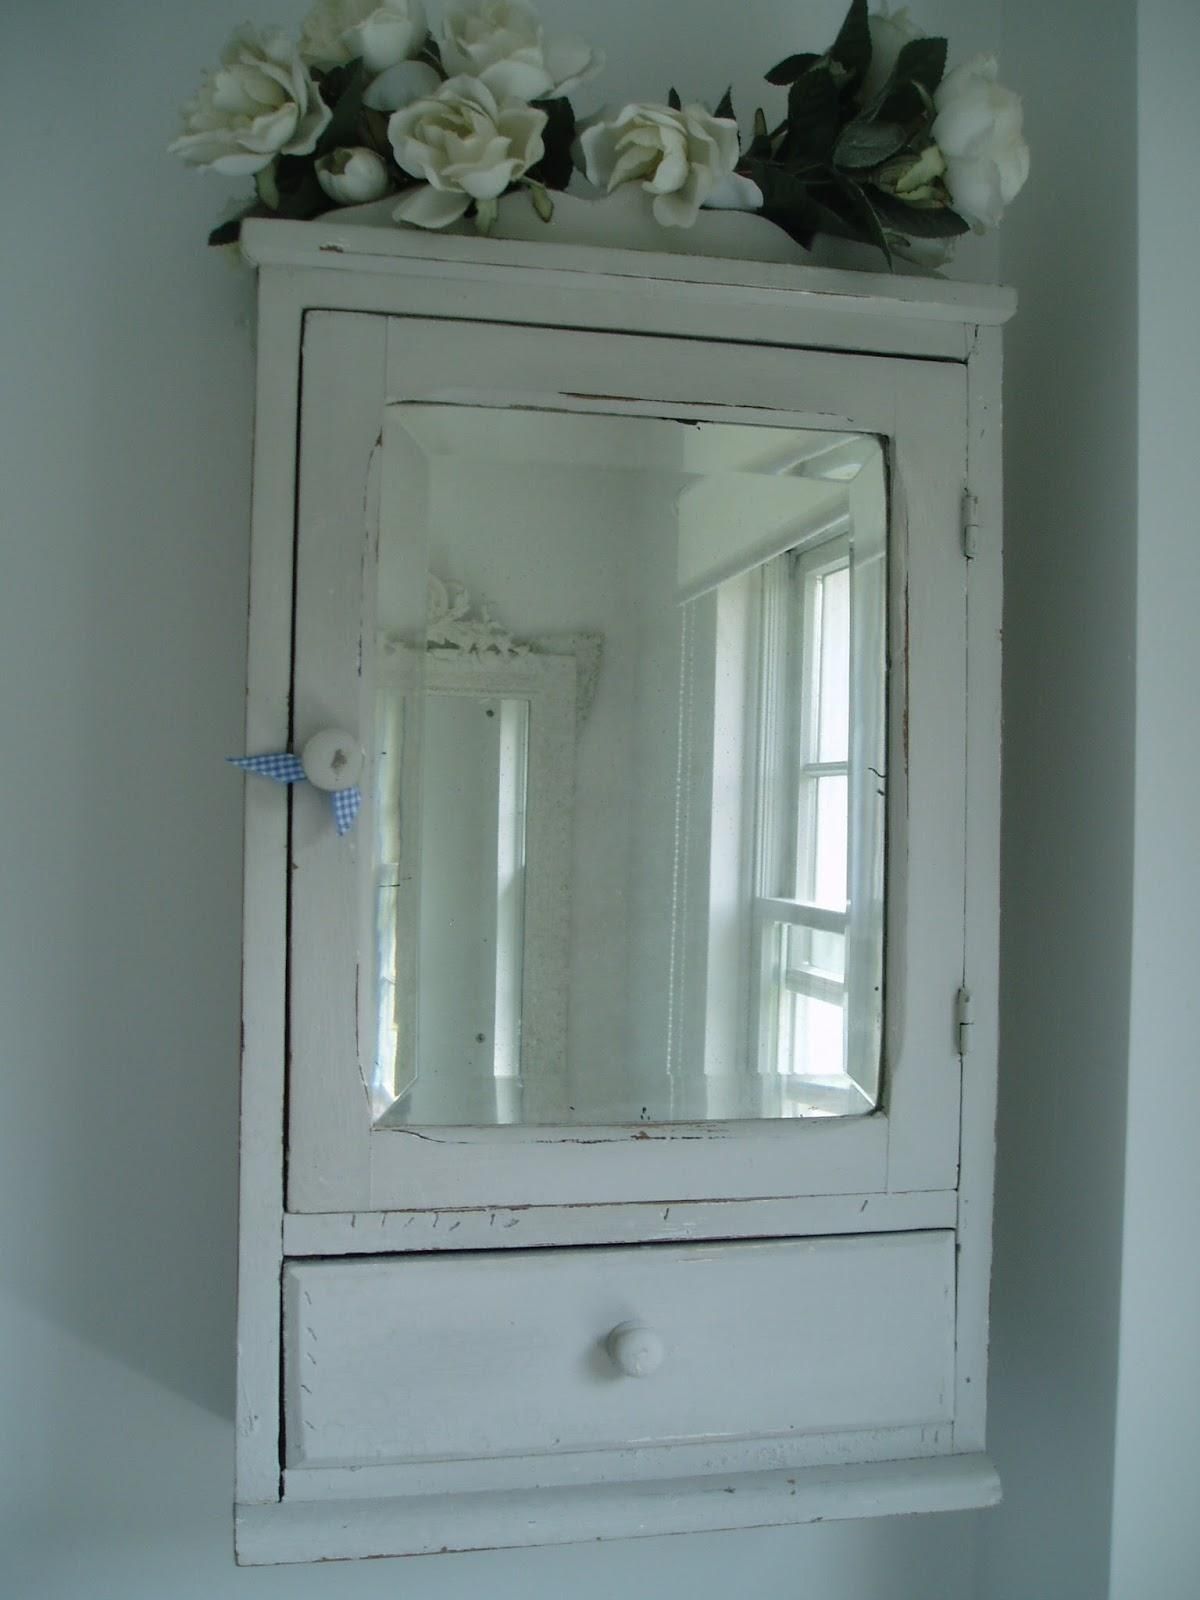 Tremendous Old Fashioned Bathroom Mirrors Buy John Lewis Vintage Inside Bathroom Mirrors Vintage (Photo 6 of 20)